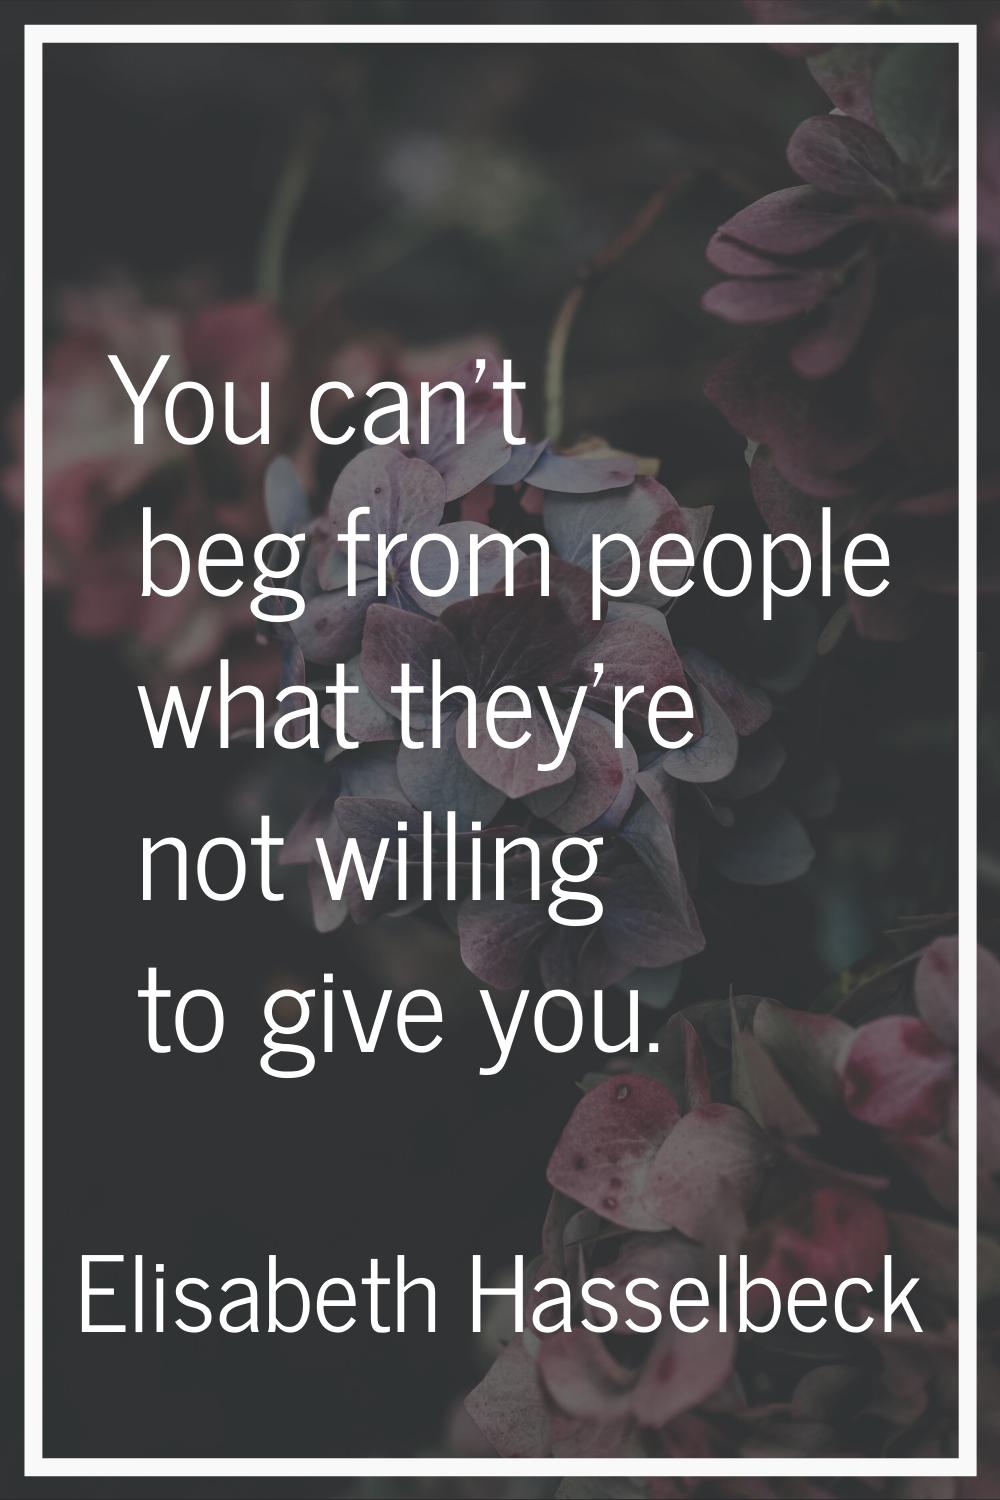 You can't beg from people what they're not willing to give you.